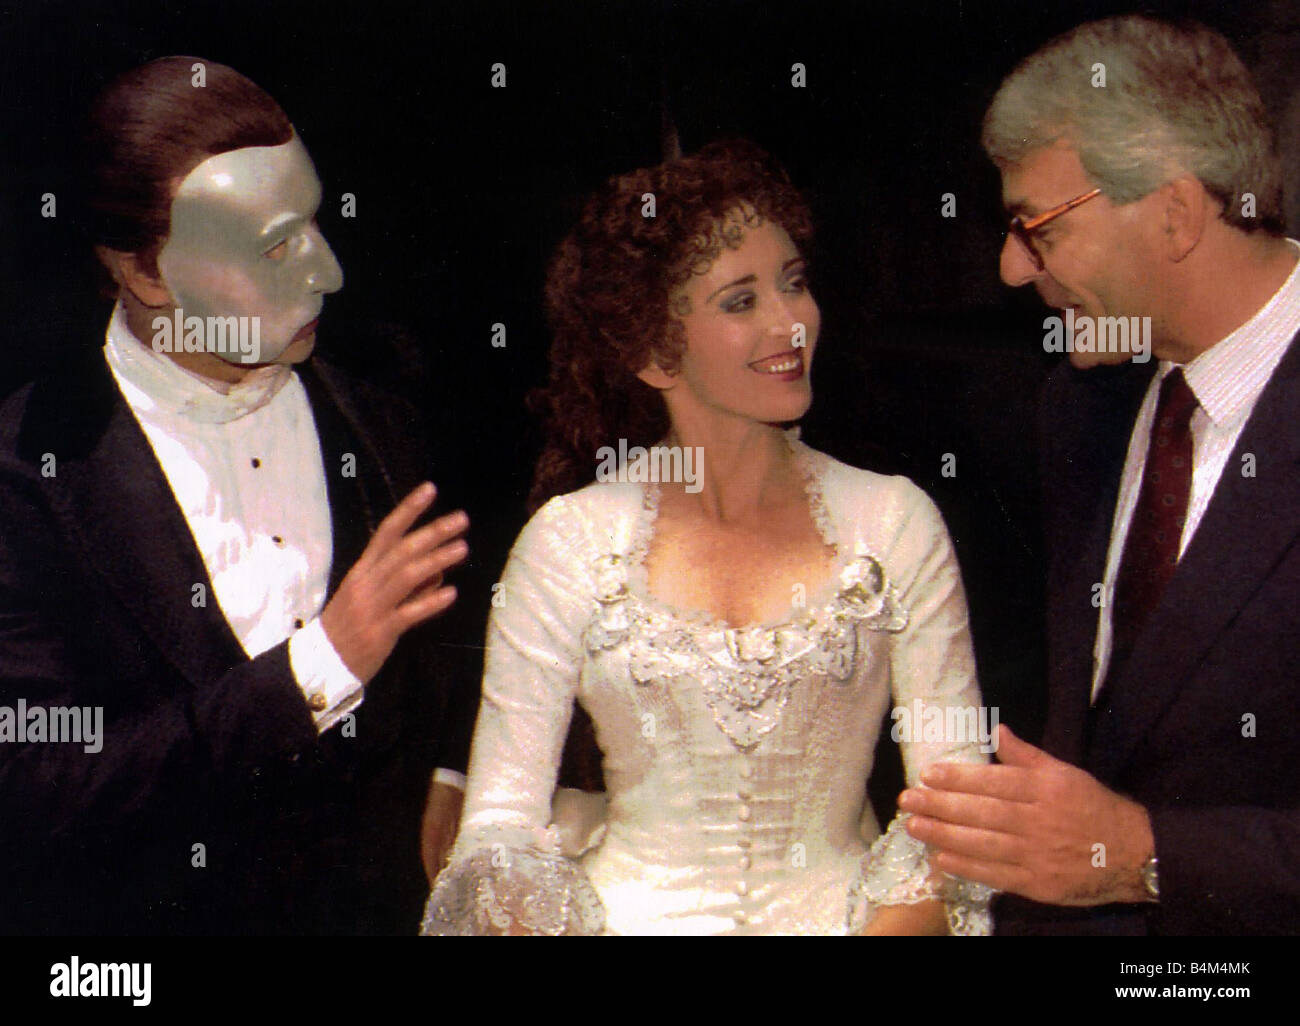 John Major at the musical Phantom of the Opera with Kevin Gray gesturing and Teri Bibb looking on 1991 Stock Photo